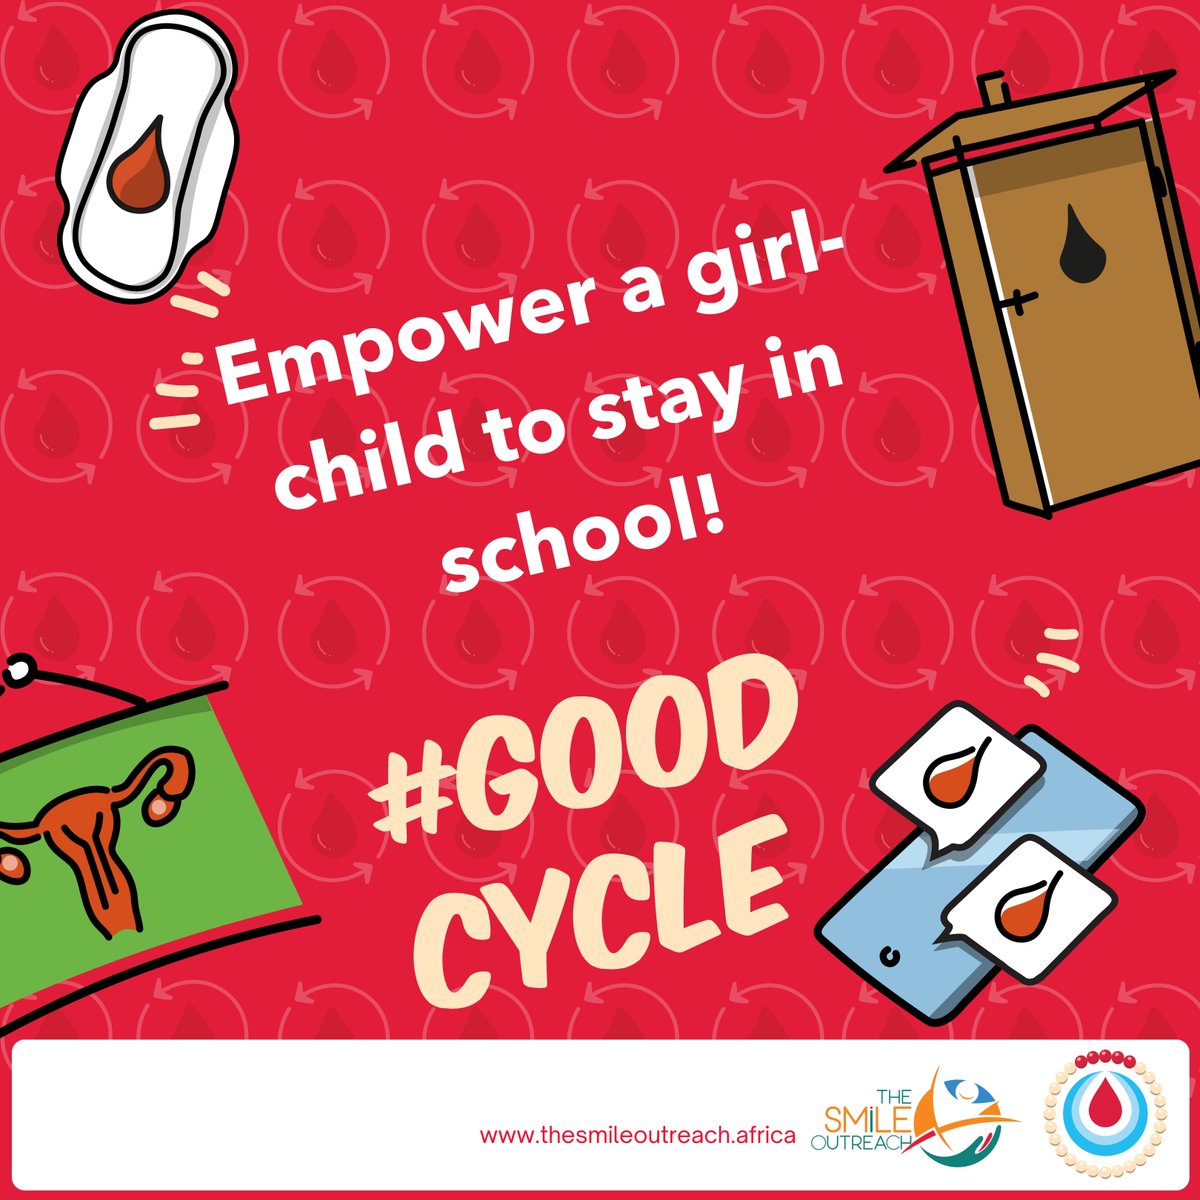 Asmau, a 15-year-old girl in Northern Nigeria, faces challenges every time she has her period. She often resorts to using pieces of cloth cut from old fabric by her mother. 

See thesmileoutreach.africa to learn more.

#PeriodFriendly #FriendlyCycle #TheGoodCycle #PeriodGiving